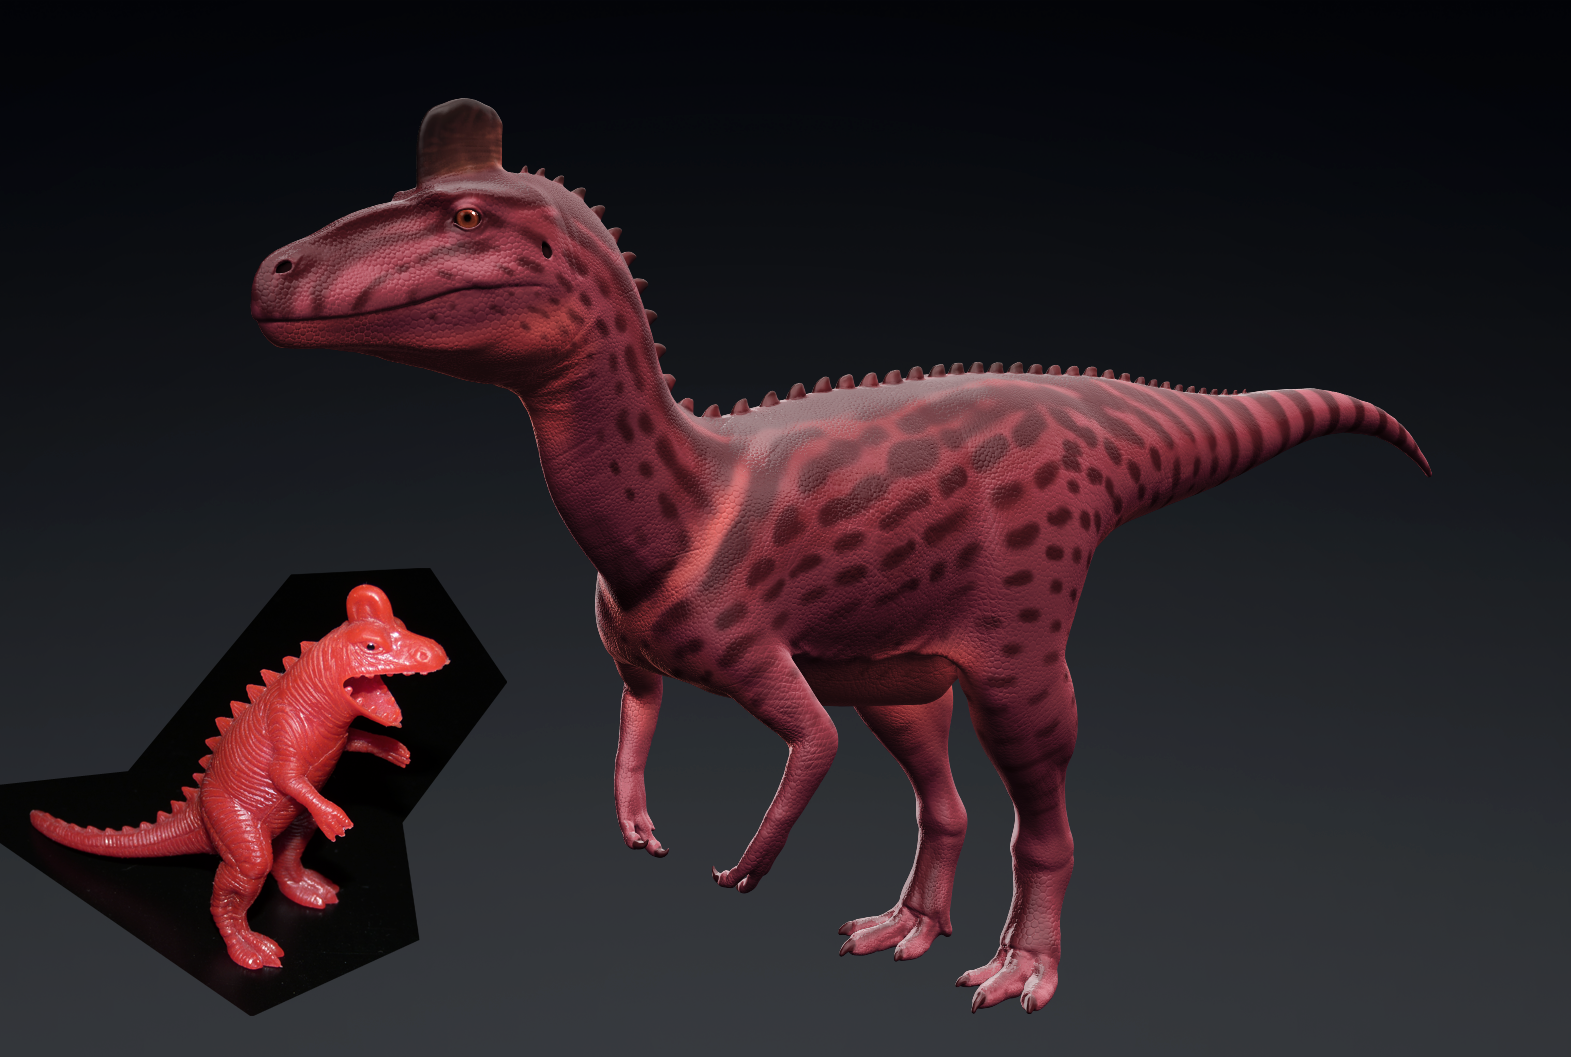 "Ludolophosaurus" dinosaur model with inset image of the original Chinese dinosaur toy that inspired it